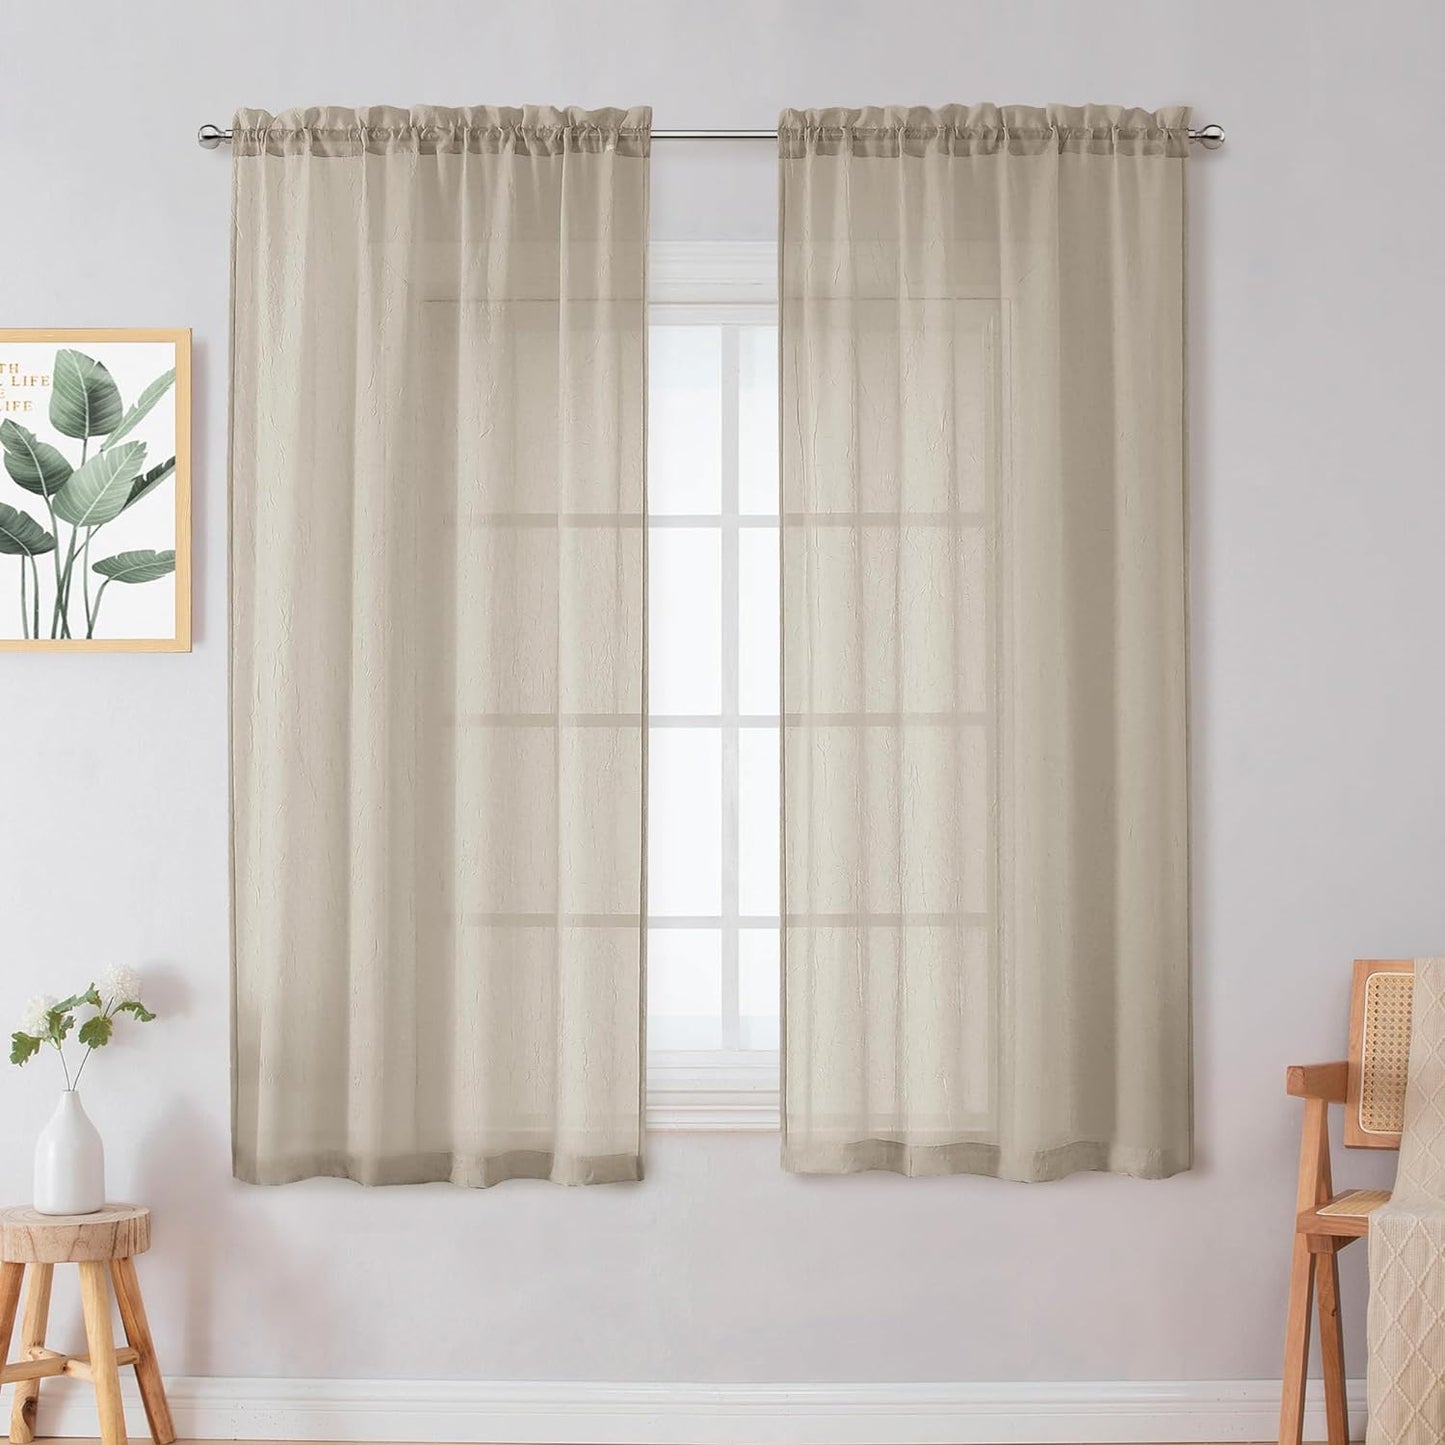 Crushed Sheer White Curtains 63 Inch Length 2 Panels, Light Filtering Solid Crinkle Voile Short Sheer Curtian for Bedroom Living Room, Each 42Wx63L Inches  Chyhomenyc Taupe 42 W X 63 L 